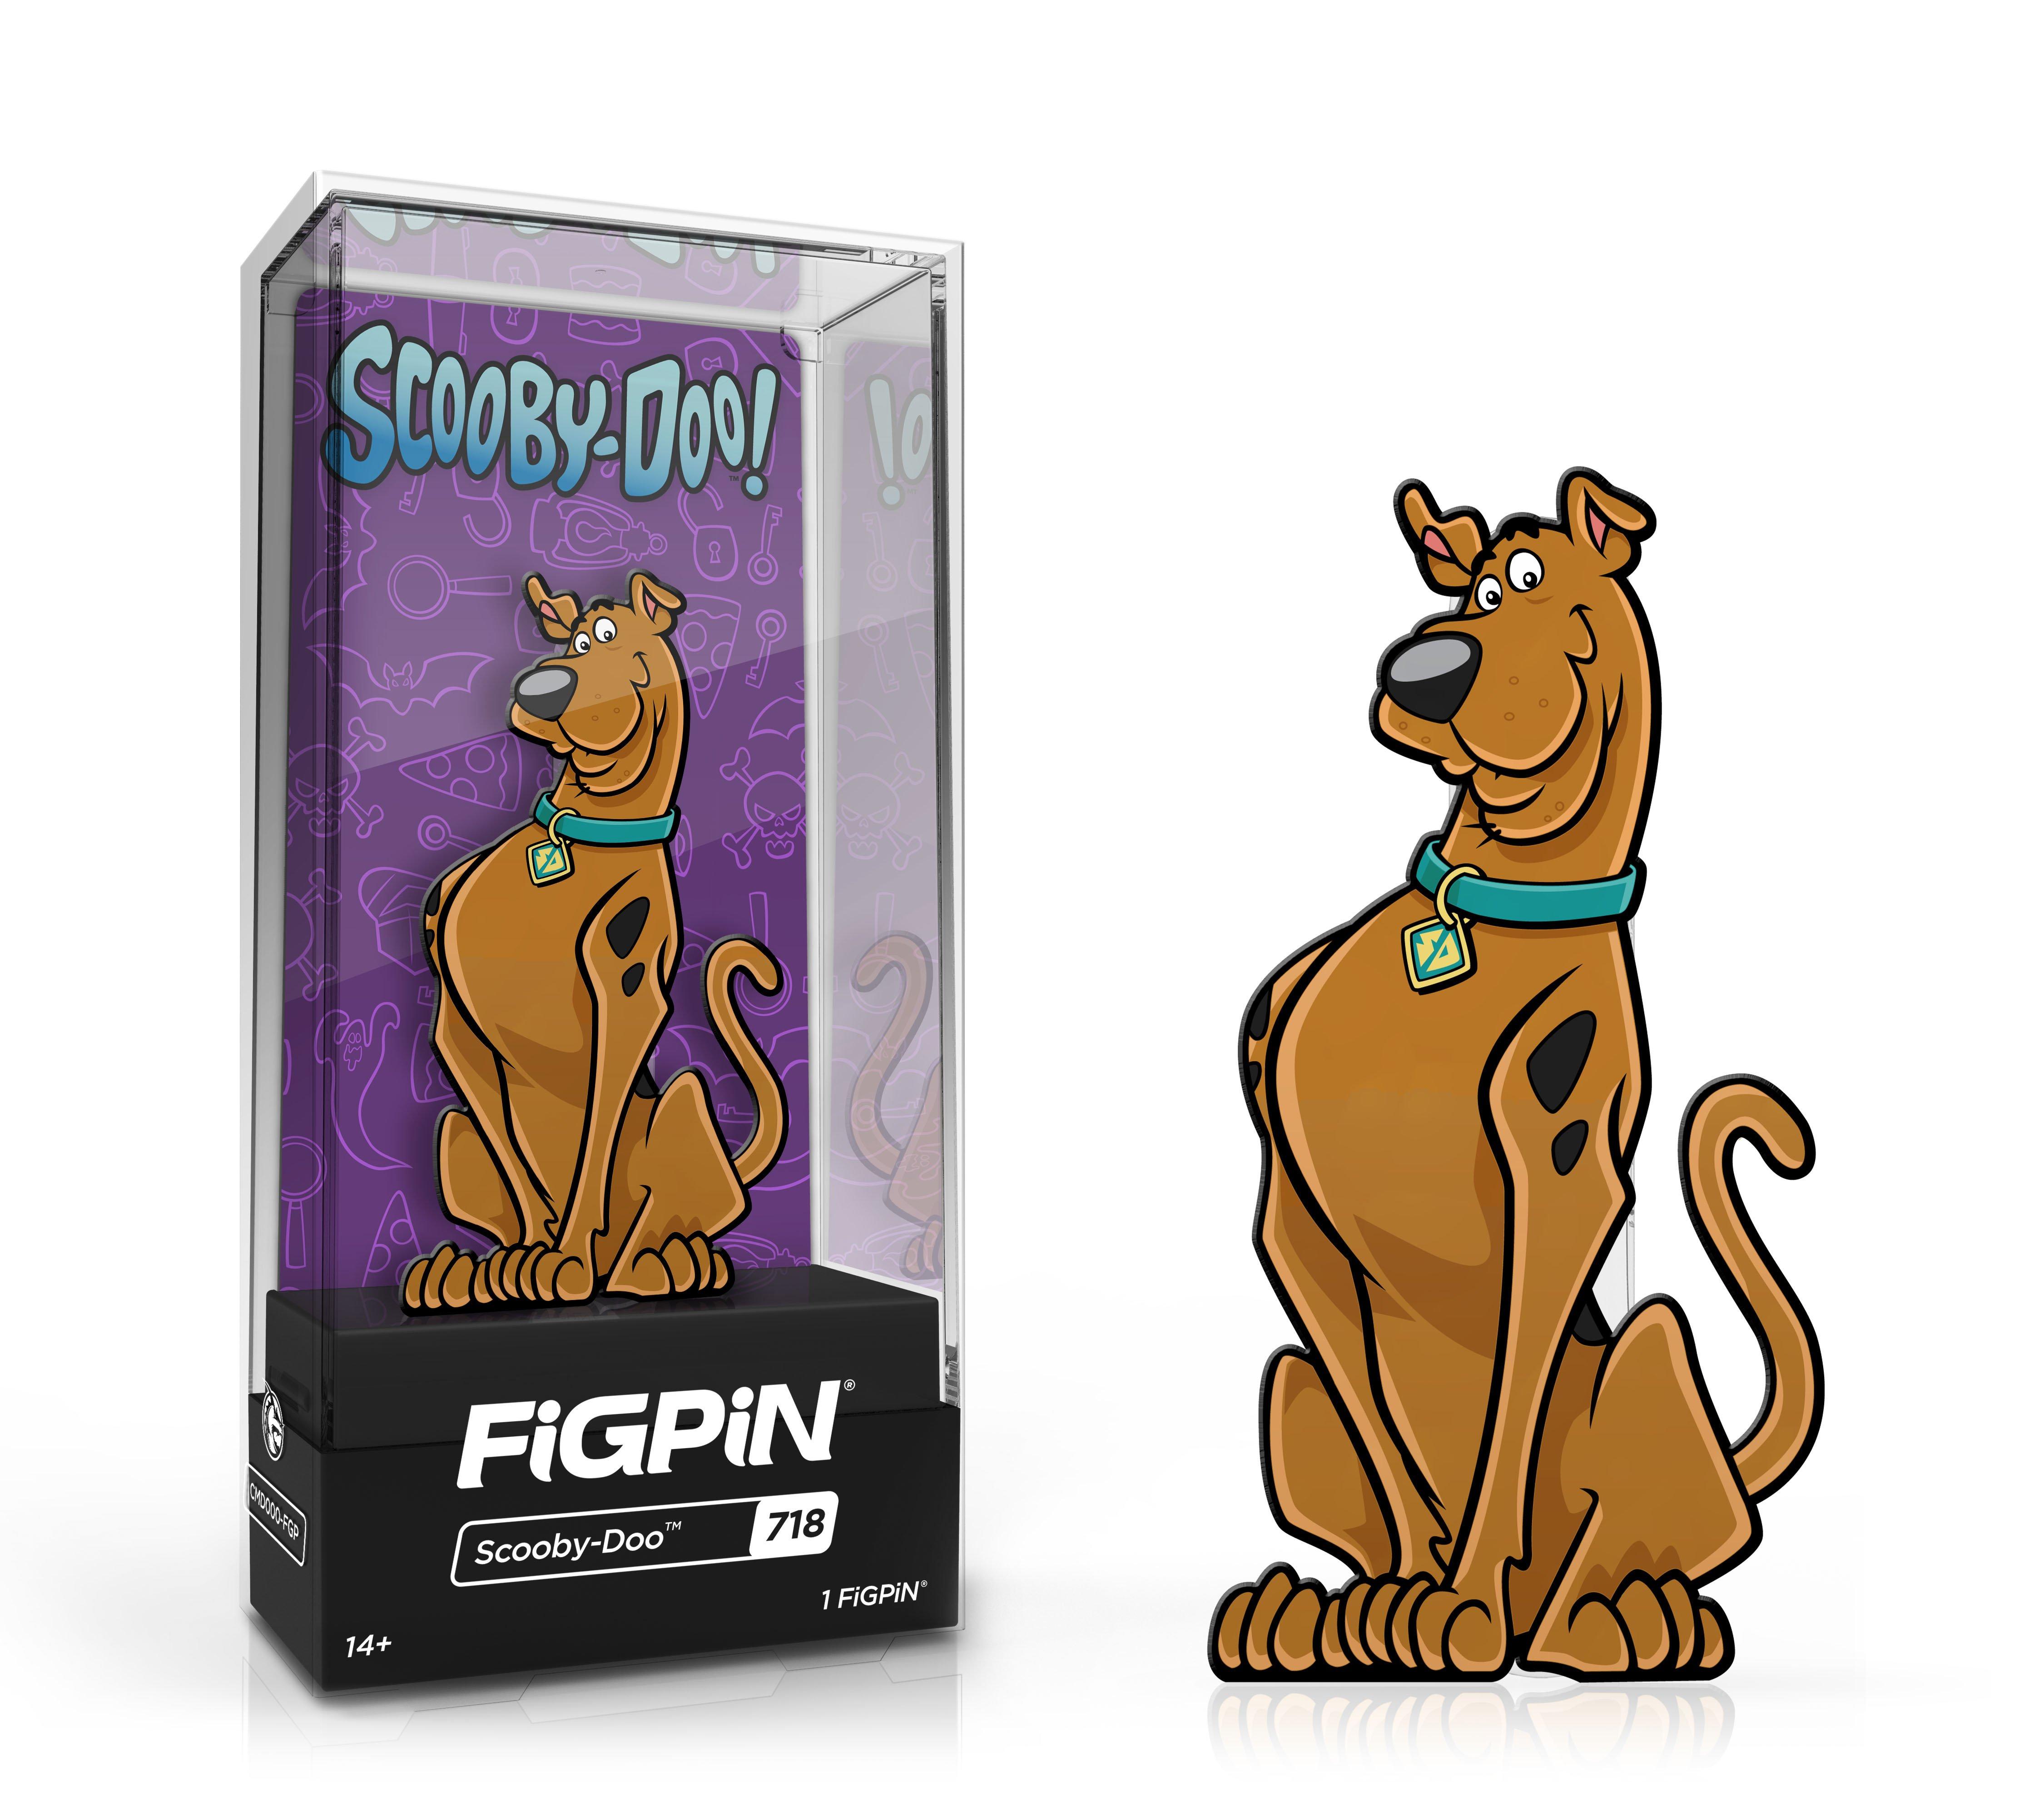 FiGPiN Scooby-Doo - Scooby-Doo Collectible Enamel Pin